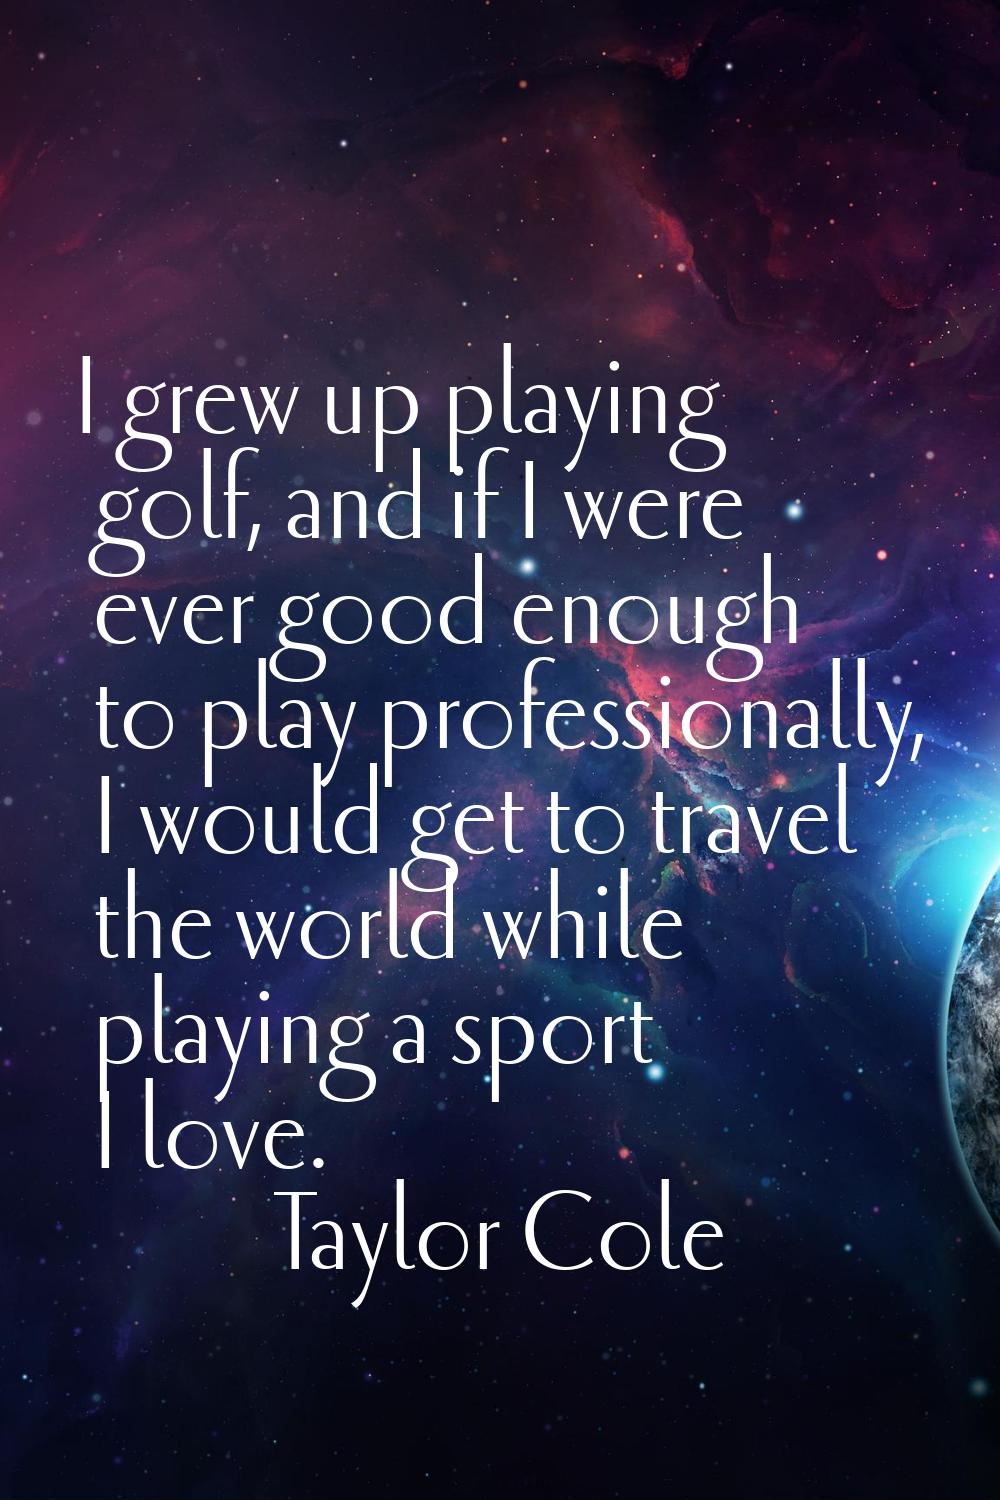 I grew up playing golf, and if I were ever good enough to play professionally, I would get to trave